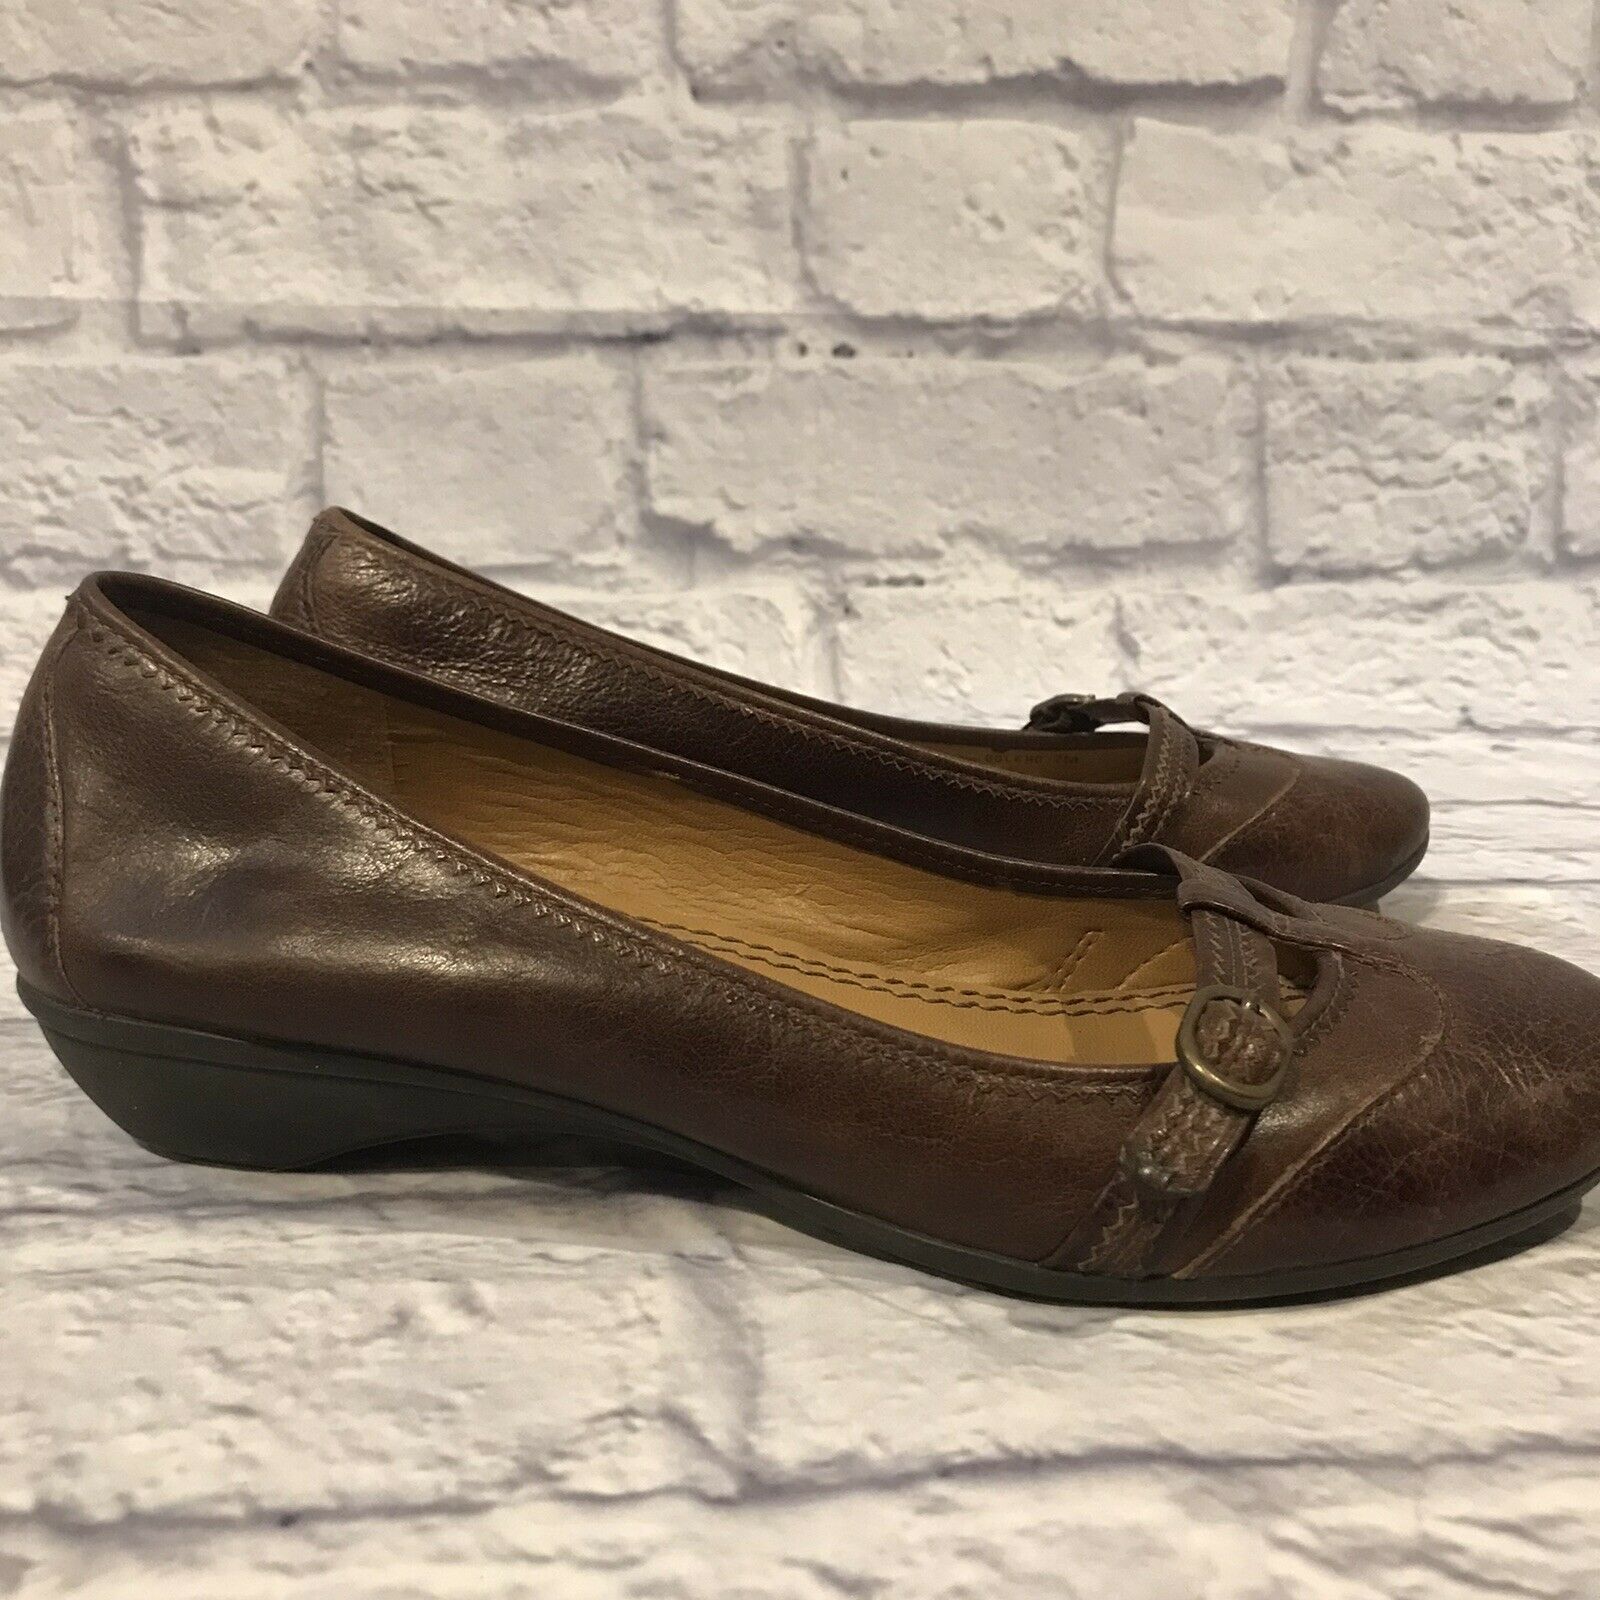 Michelle D Women's Sz 7M Brown 1-Inch Low Heel Shoes Work Business Casual